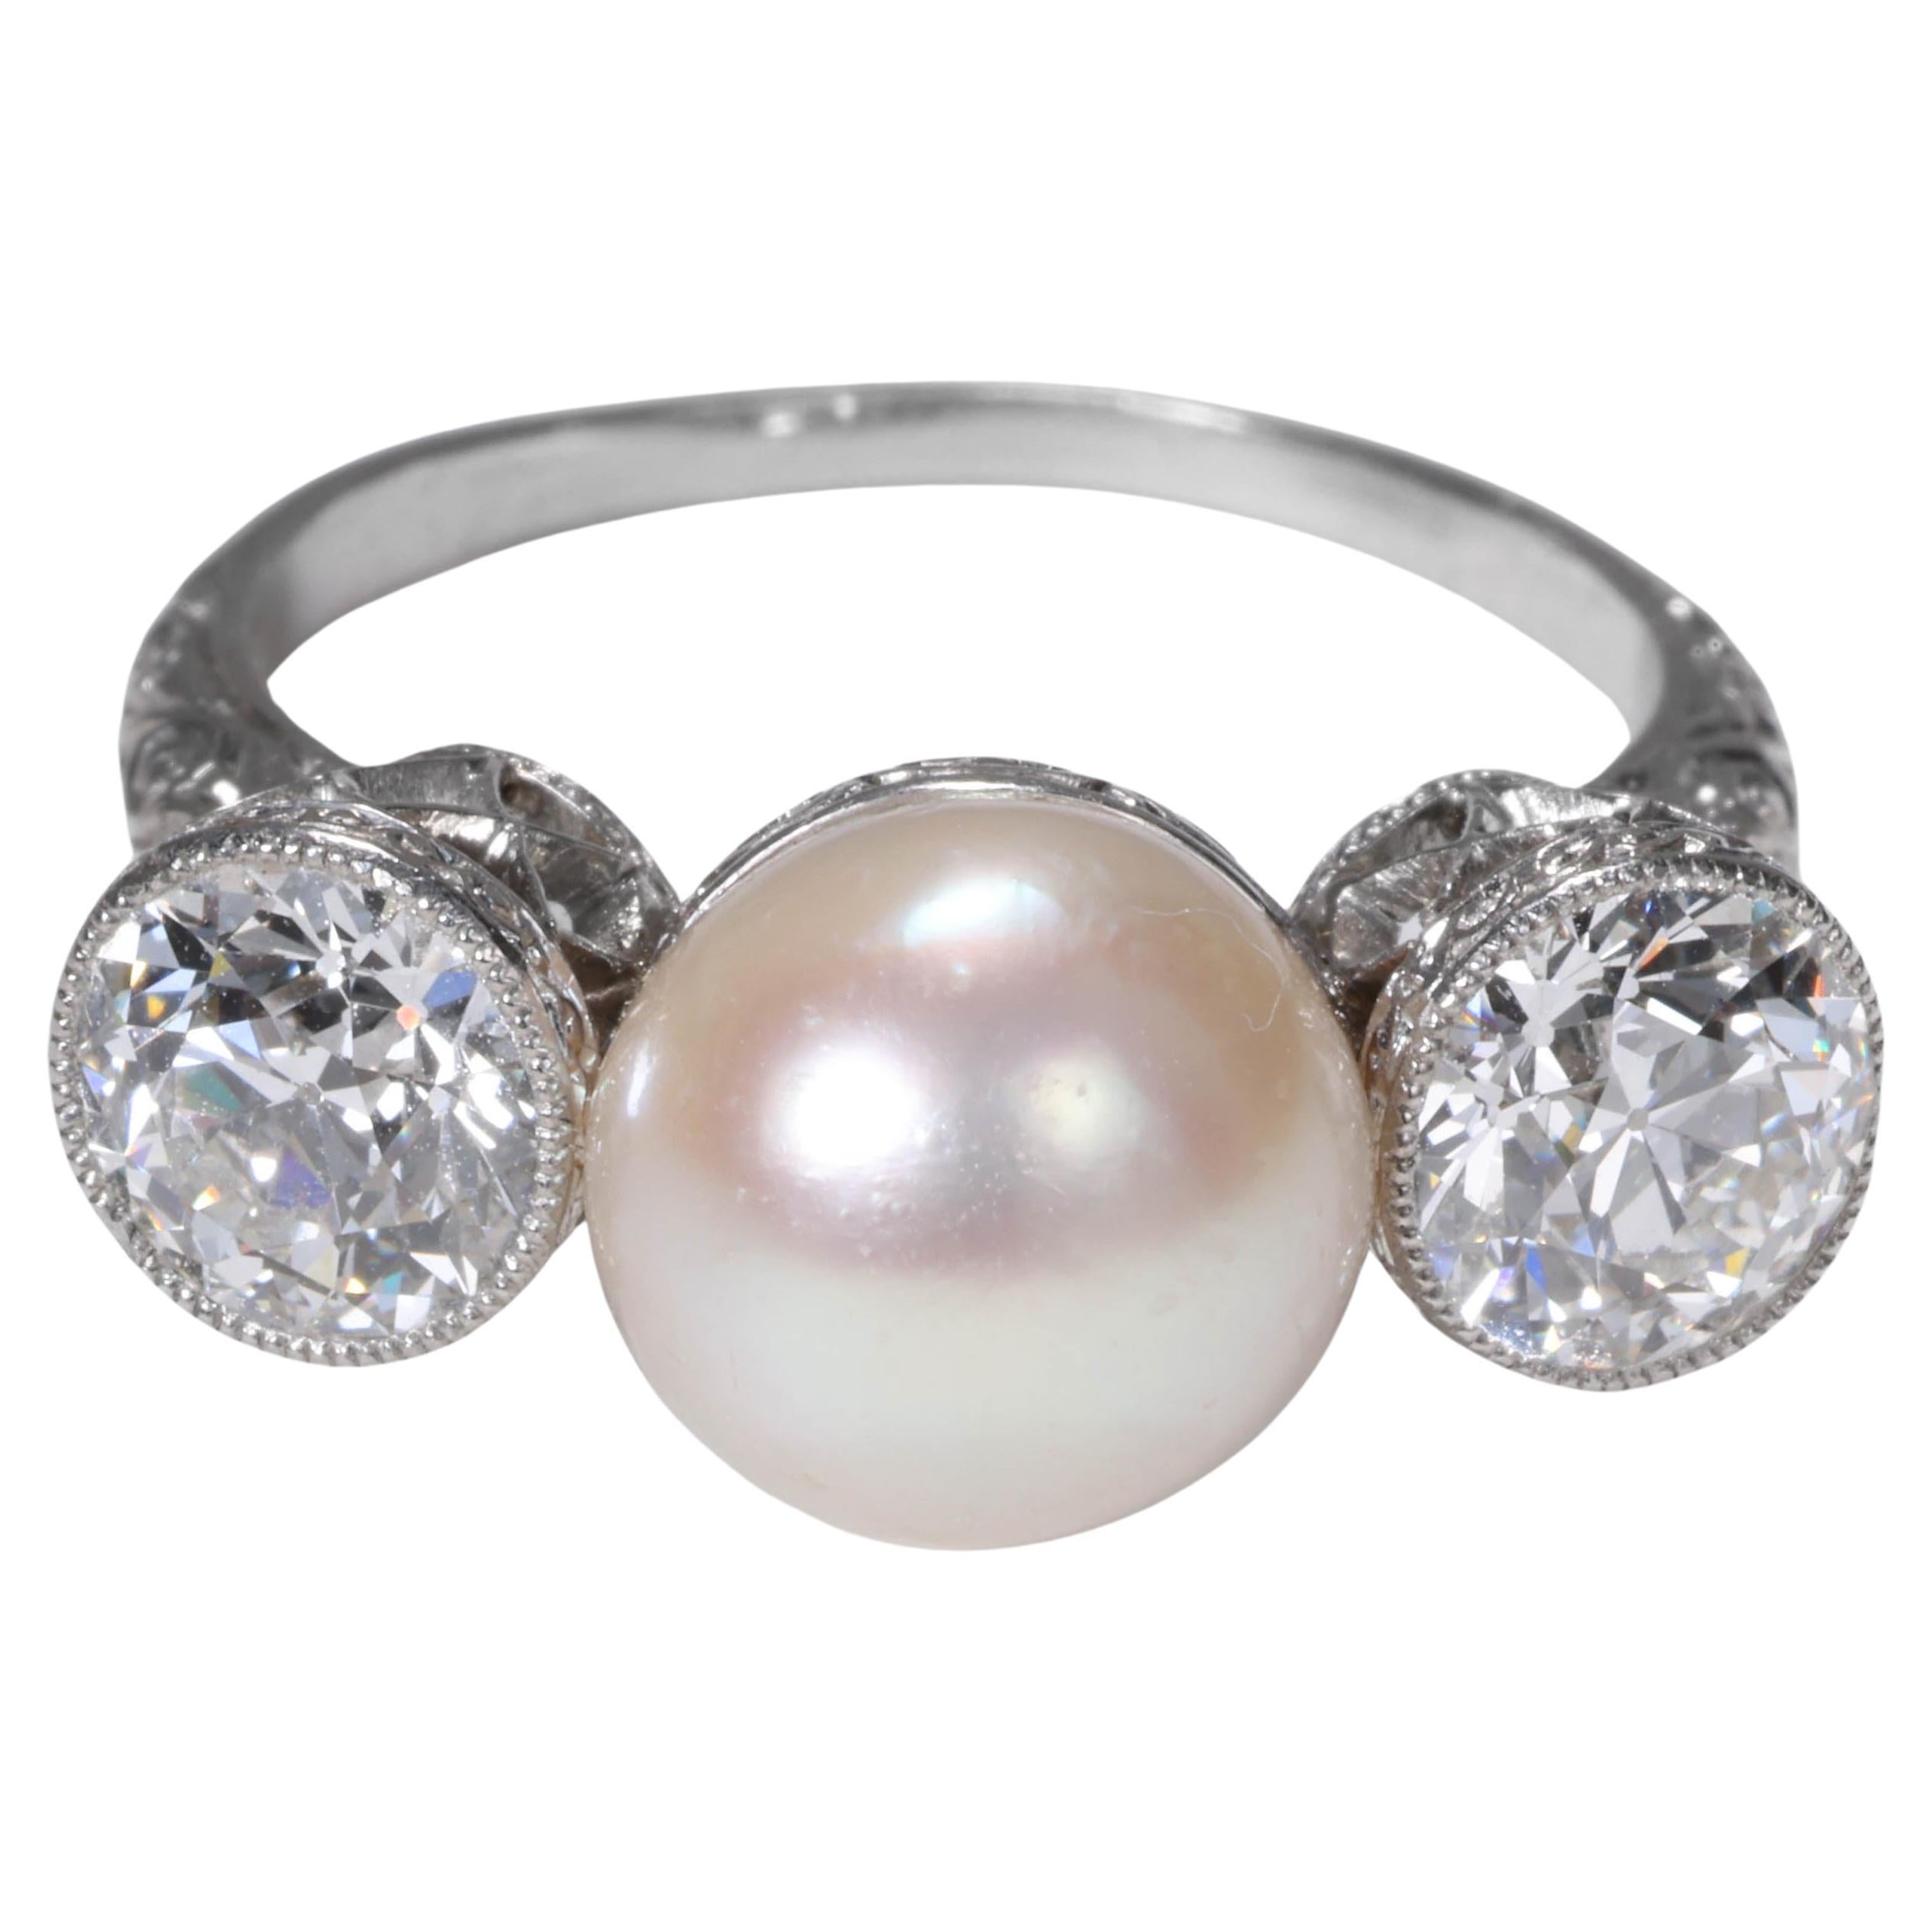 This is a magnificent Edwardian Era (circa 1905) GIA-certified natural (uncultured) saltwater pearl and diamond ring, fabricated by hand in platinum by the oldest jeweler in America, Black, Starr & Frost.

This exquisite and sensuous jewel was